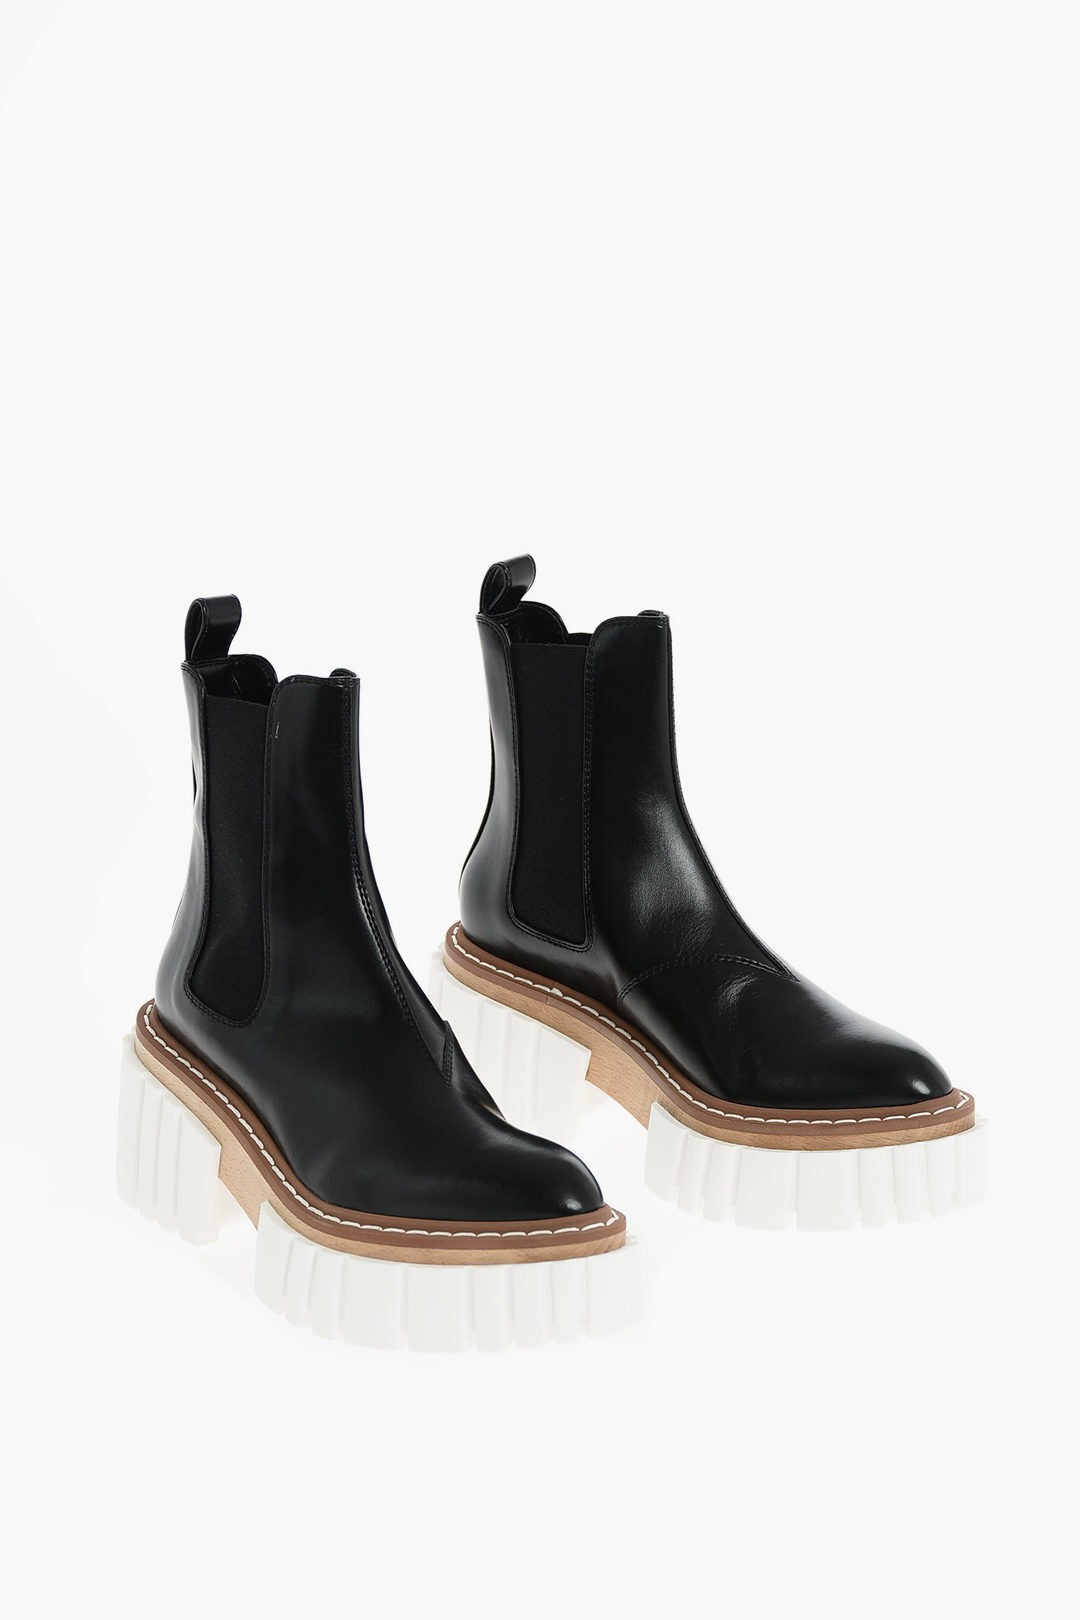 STELLA　MCCARTNEY　ステラ　N01311002　Black　BOOTIES　EMILIE　マッカートニー　CHELSEA　ブーツ　WITH　FAUX-LEATHER　800251　レディース　dk　POINTED-TOED　STATEM